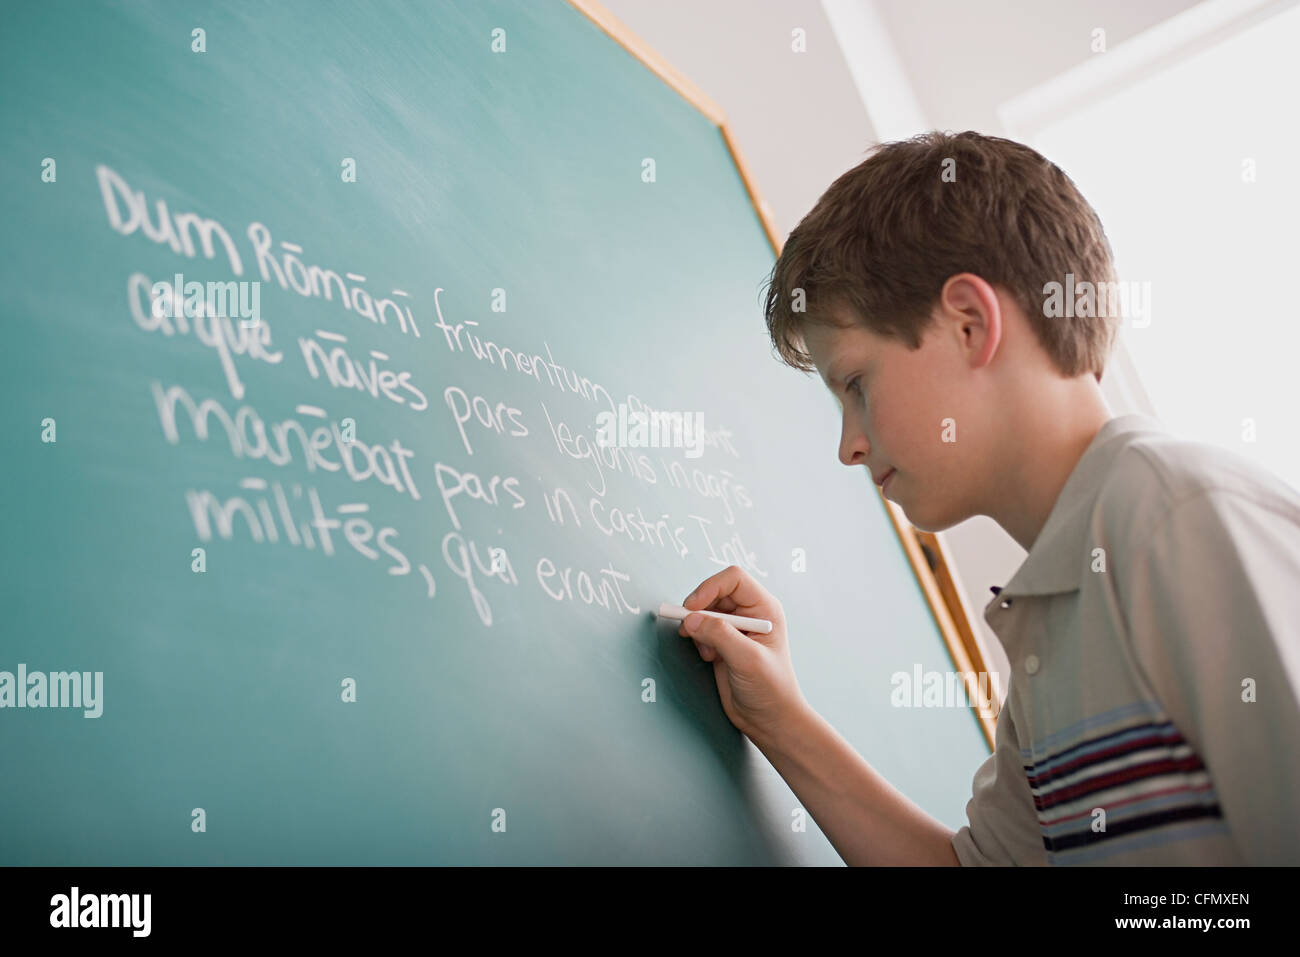 Nick went to the blackboard. Learning second language. Learning a New language is like. Картинки JW учить язык. Pupil at the blackboard.